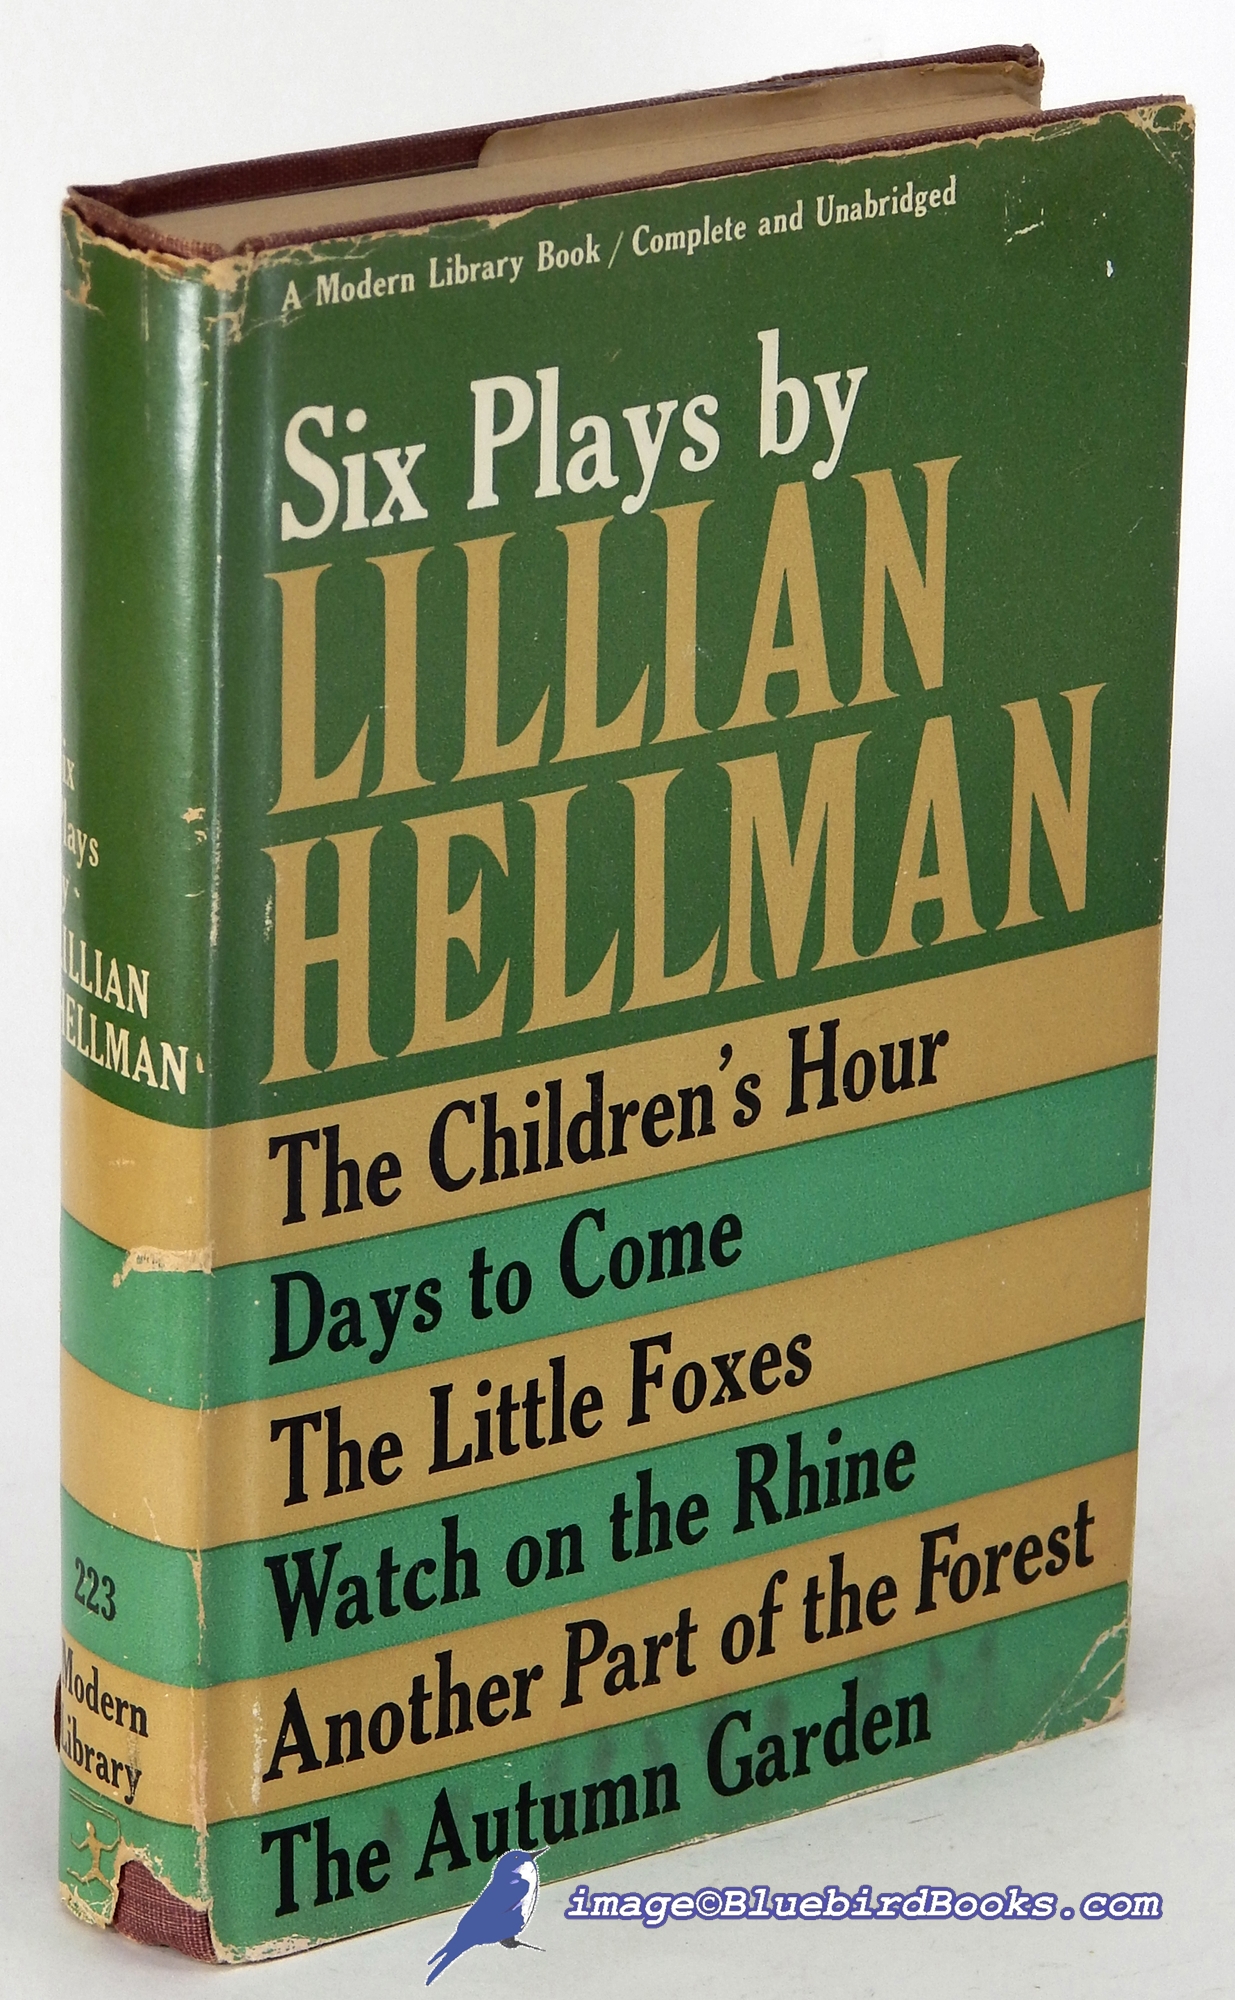 Image for Six Plays By Lillian Hellman: The Children's Hour, Days to Come, The Little Foxes, Watch on the Rhine, Another Part of the Forest, and The Autumn Garden (Modern Library #223.2)